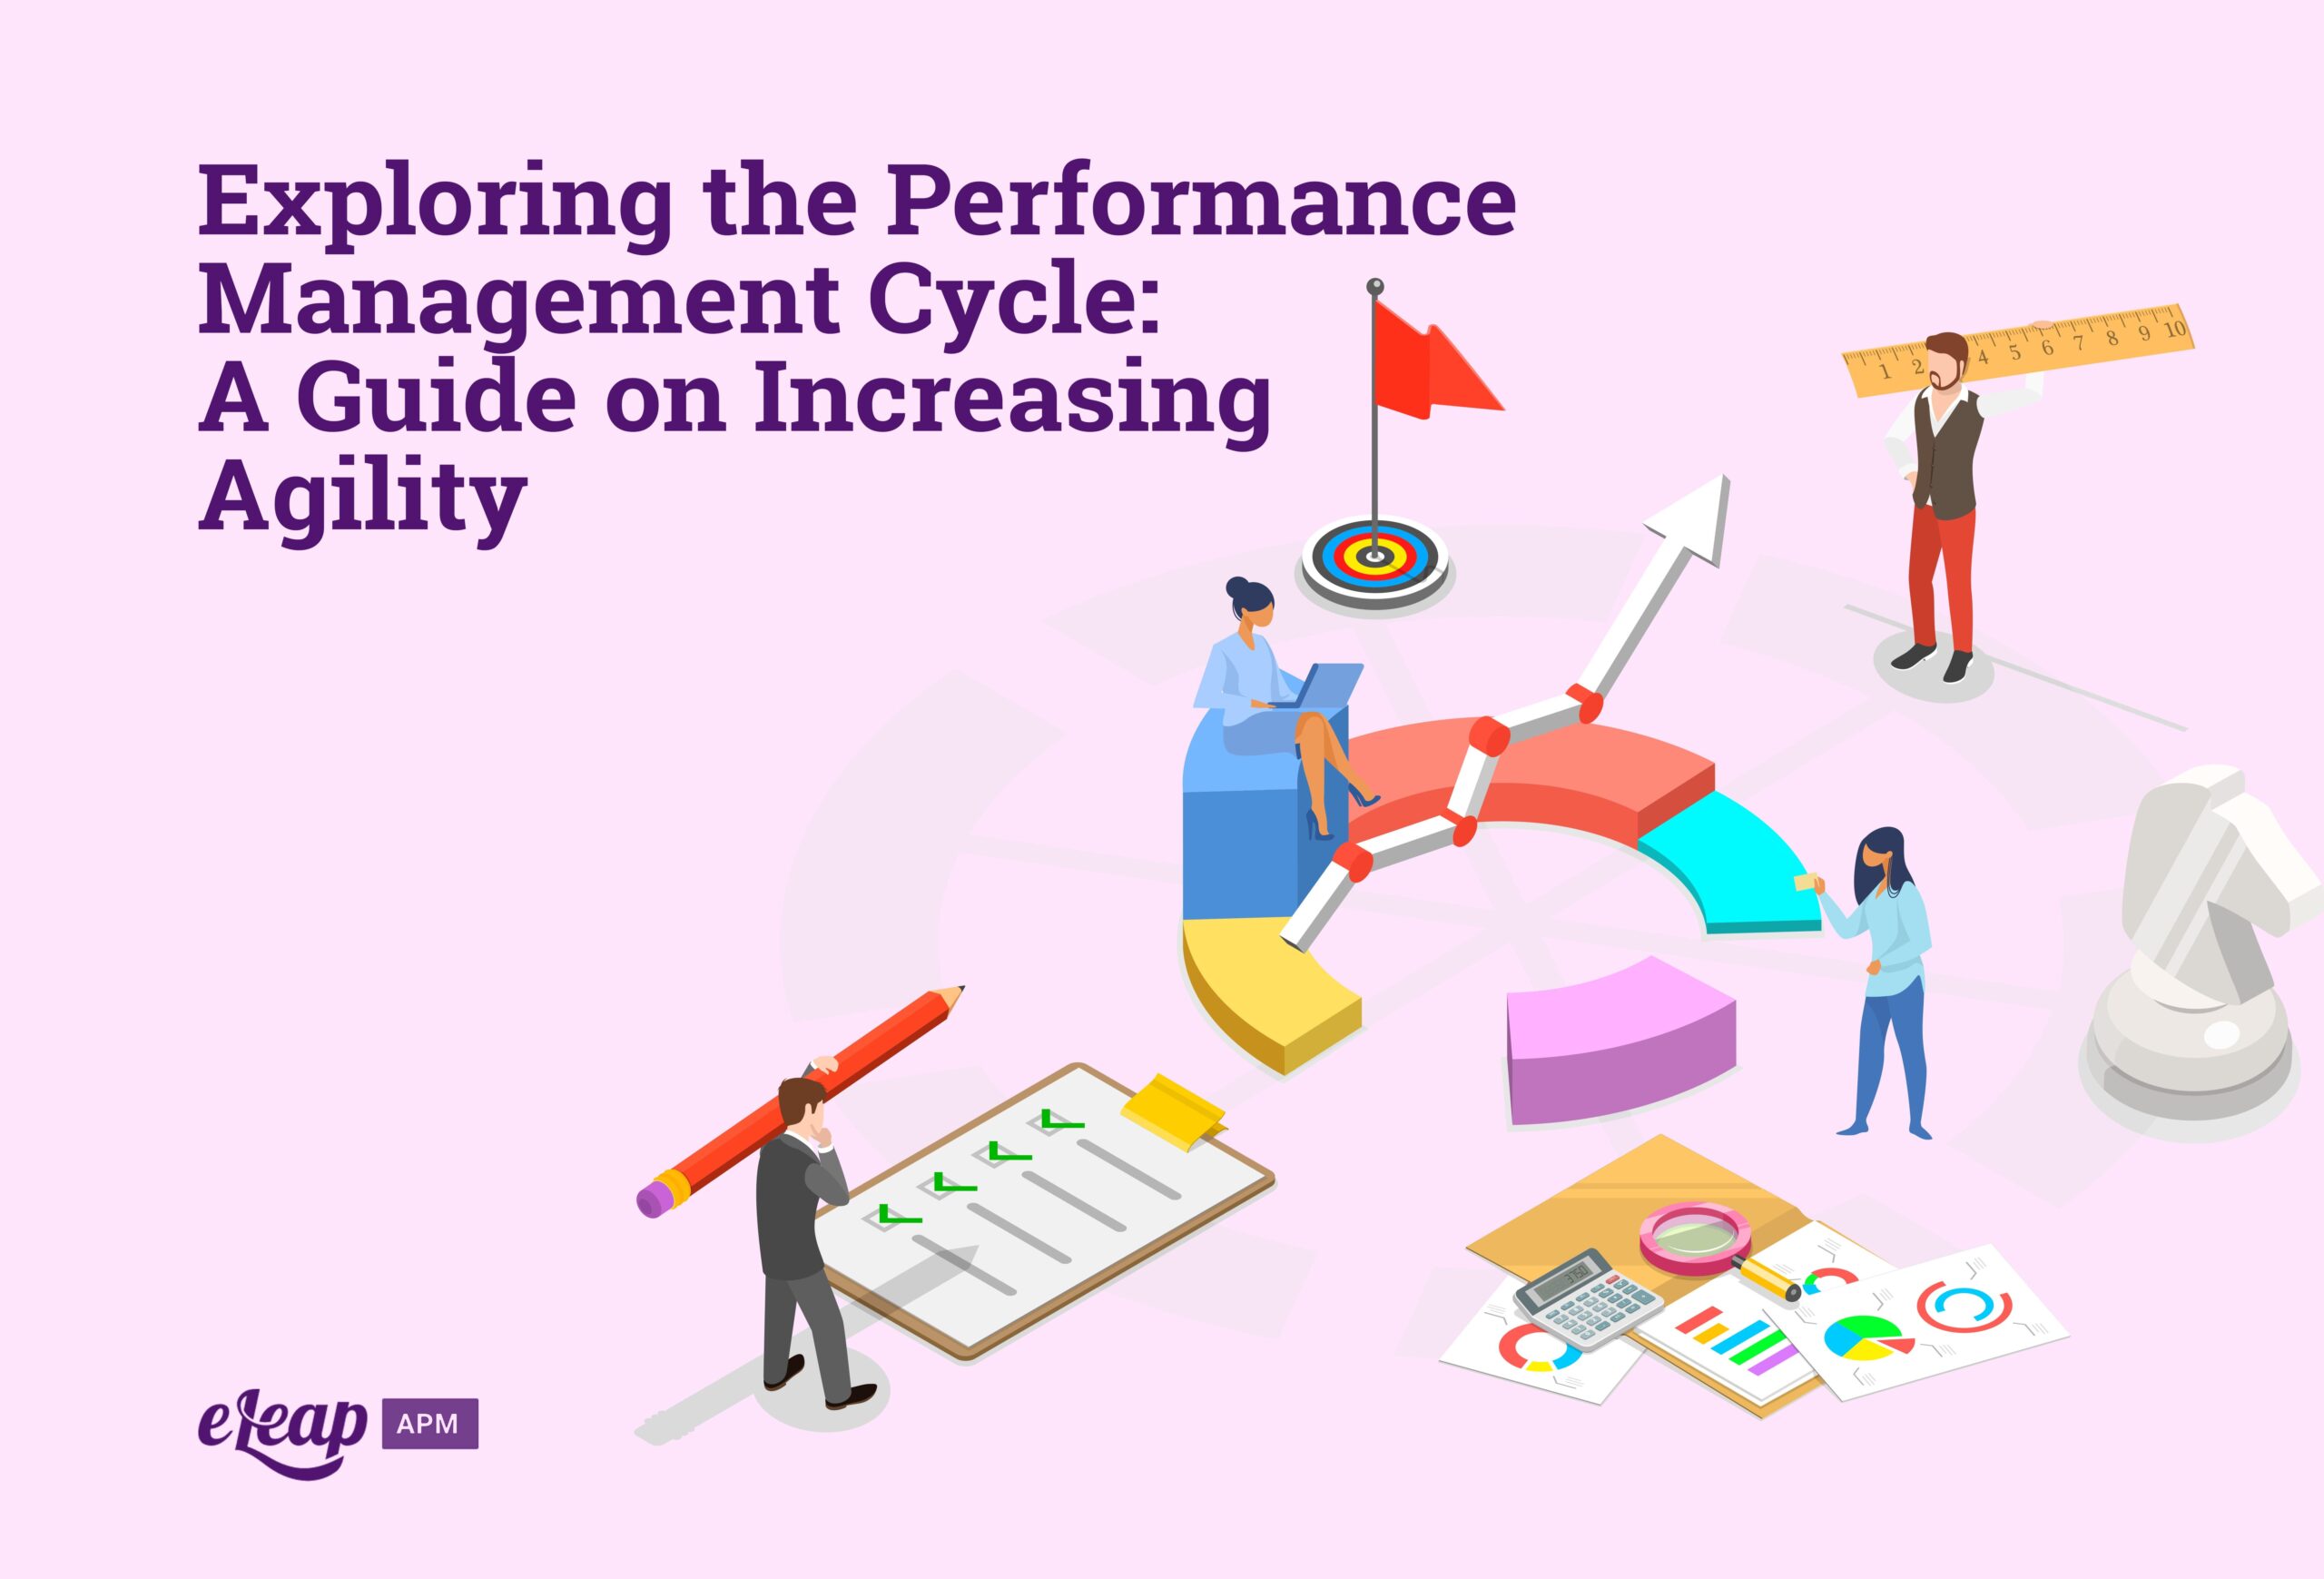 Exploring the Performance Management Cycle: A Guide on Increasing Agility